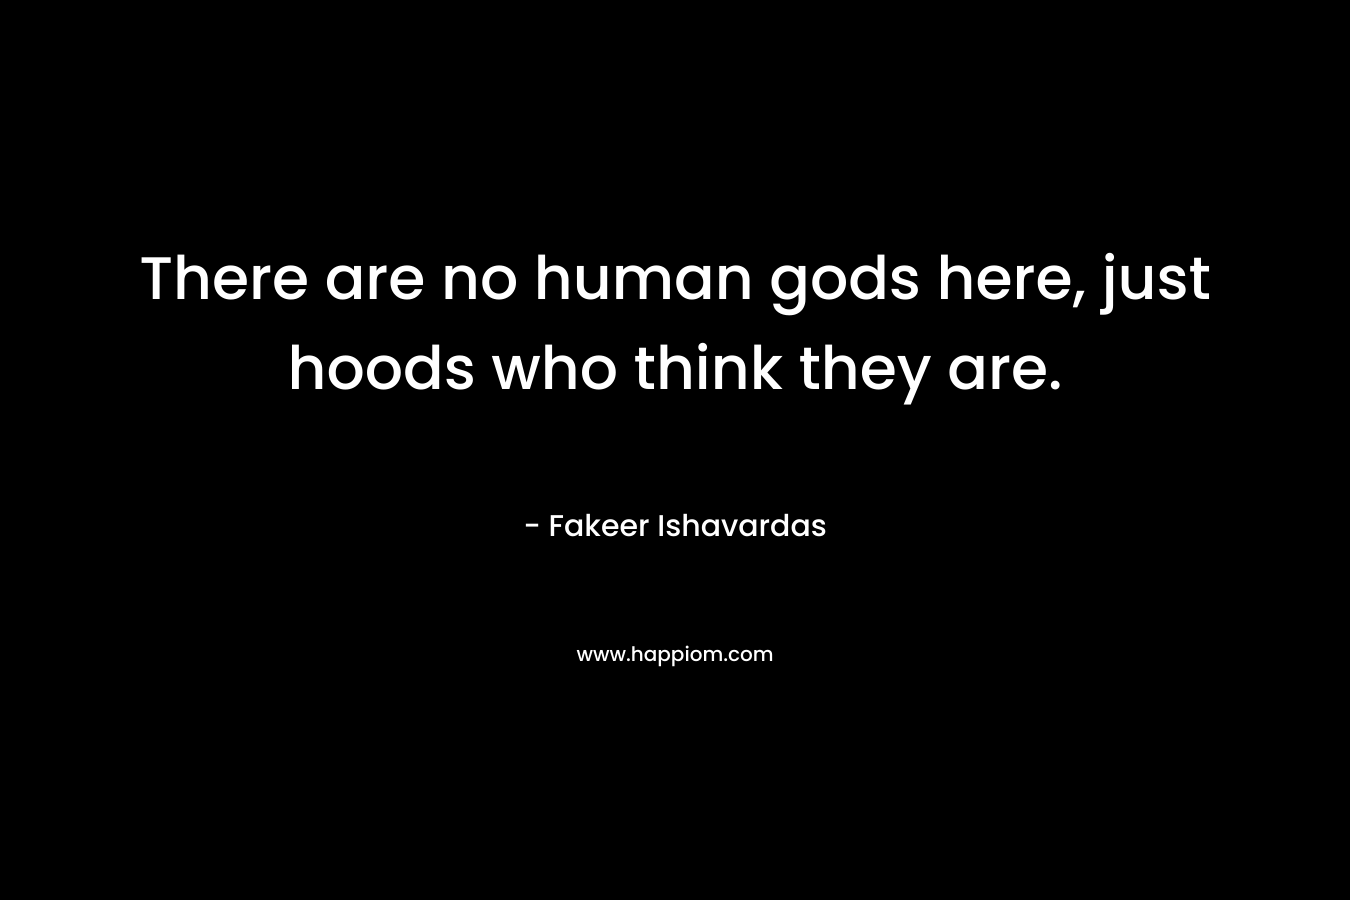 There are no human gods here, just hoods who think they are. – Fakeer Ishavardas